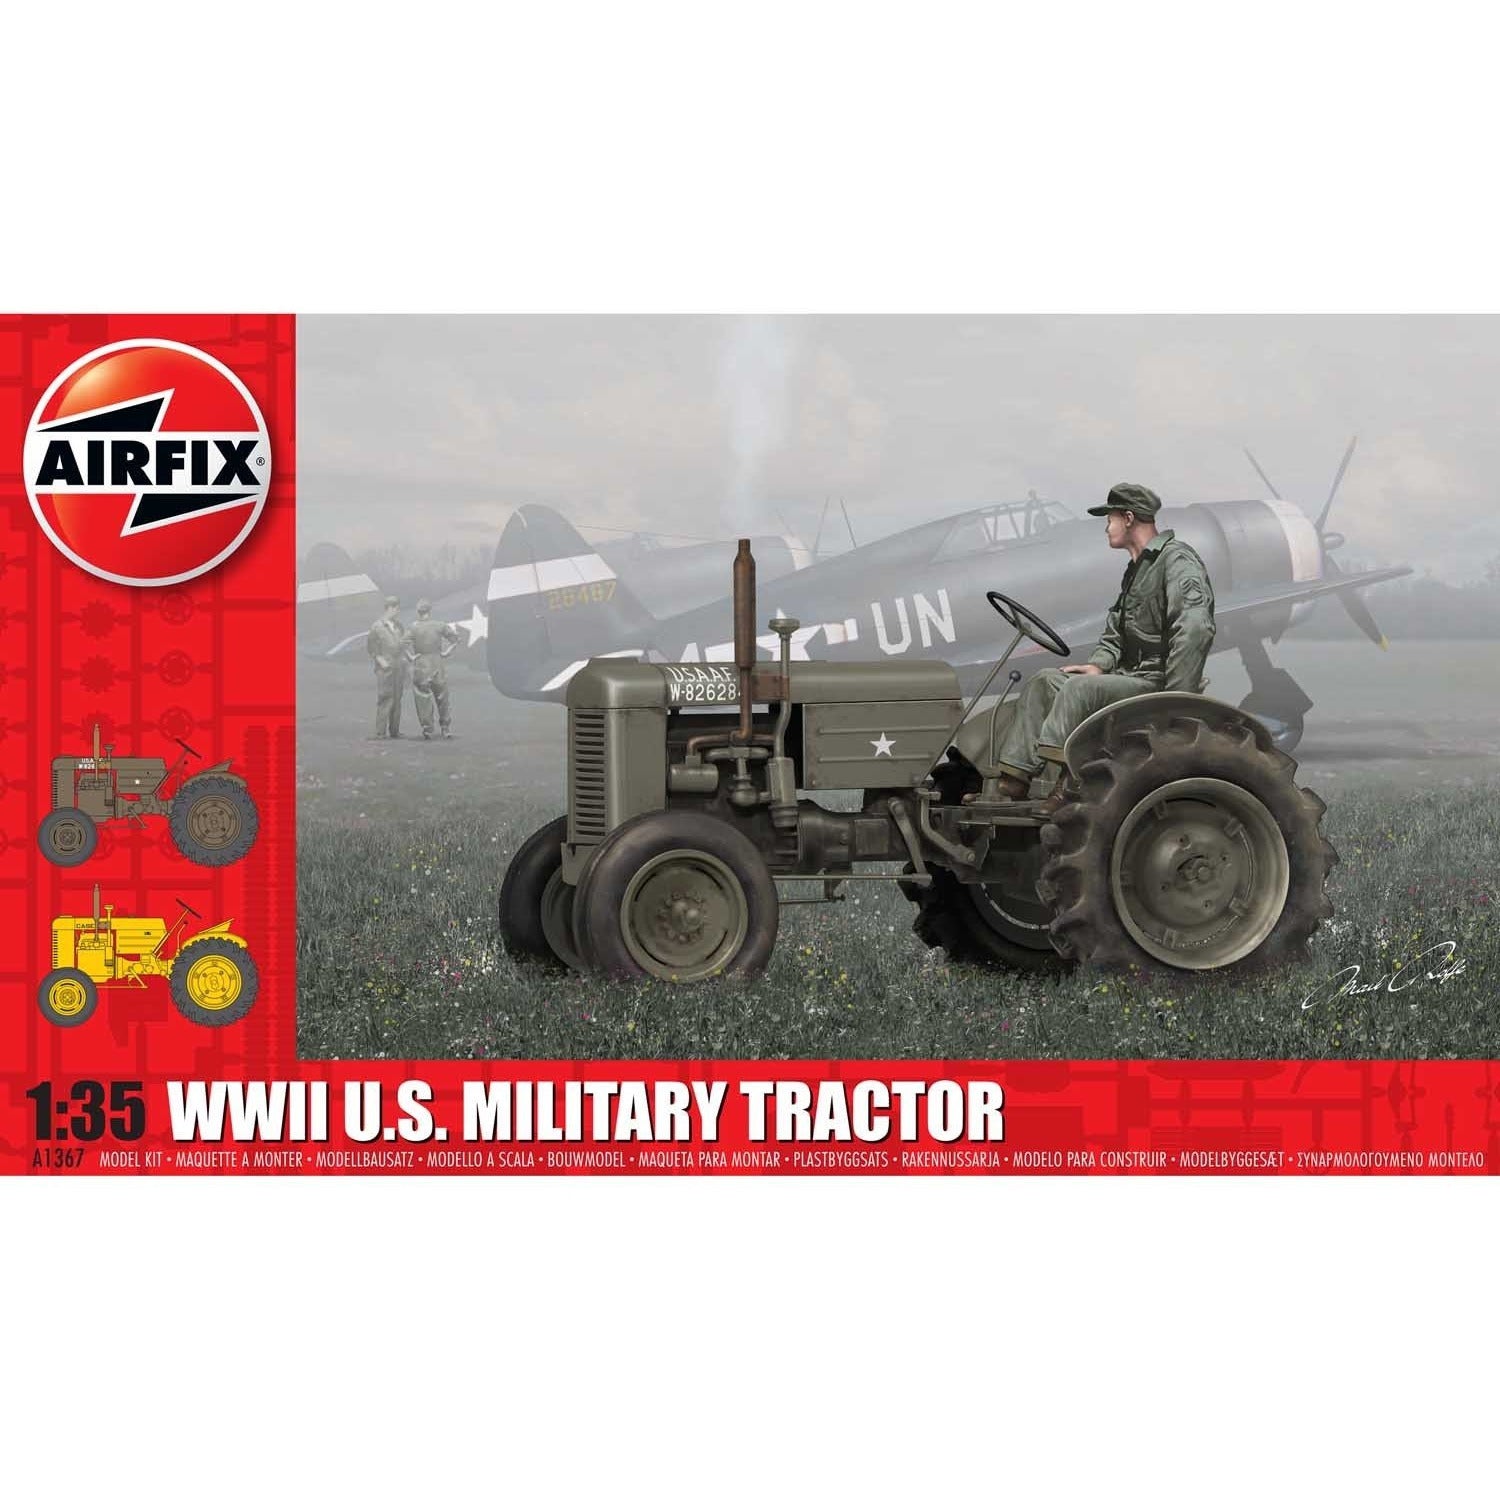 WWII U.S. Military Tractor 1/35 #A1367 by Airfix